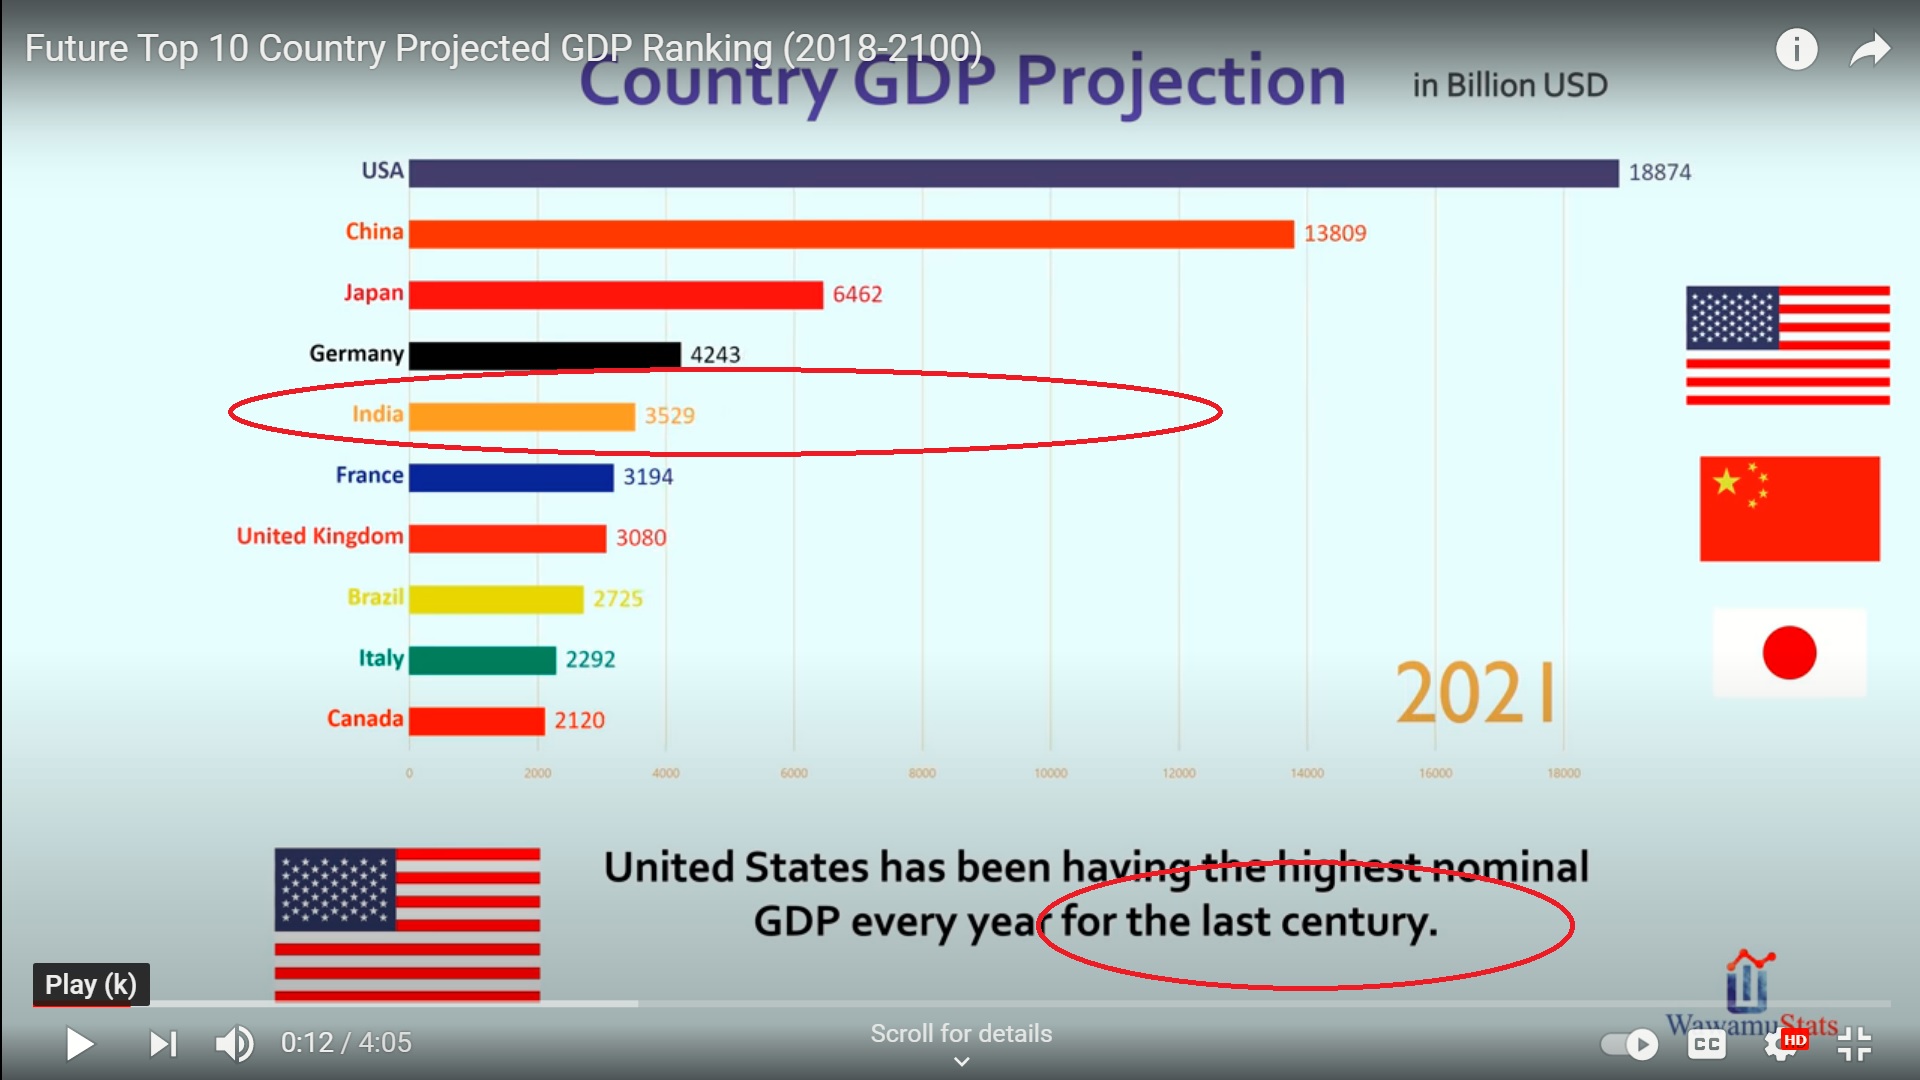 INDIA IS NUMBER 3 IN 20121 IN GDP